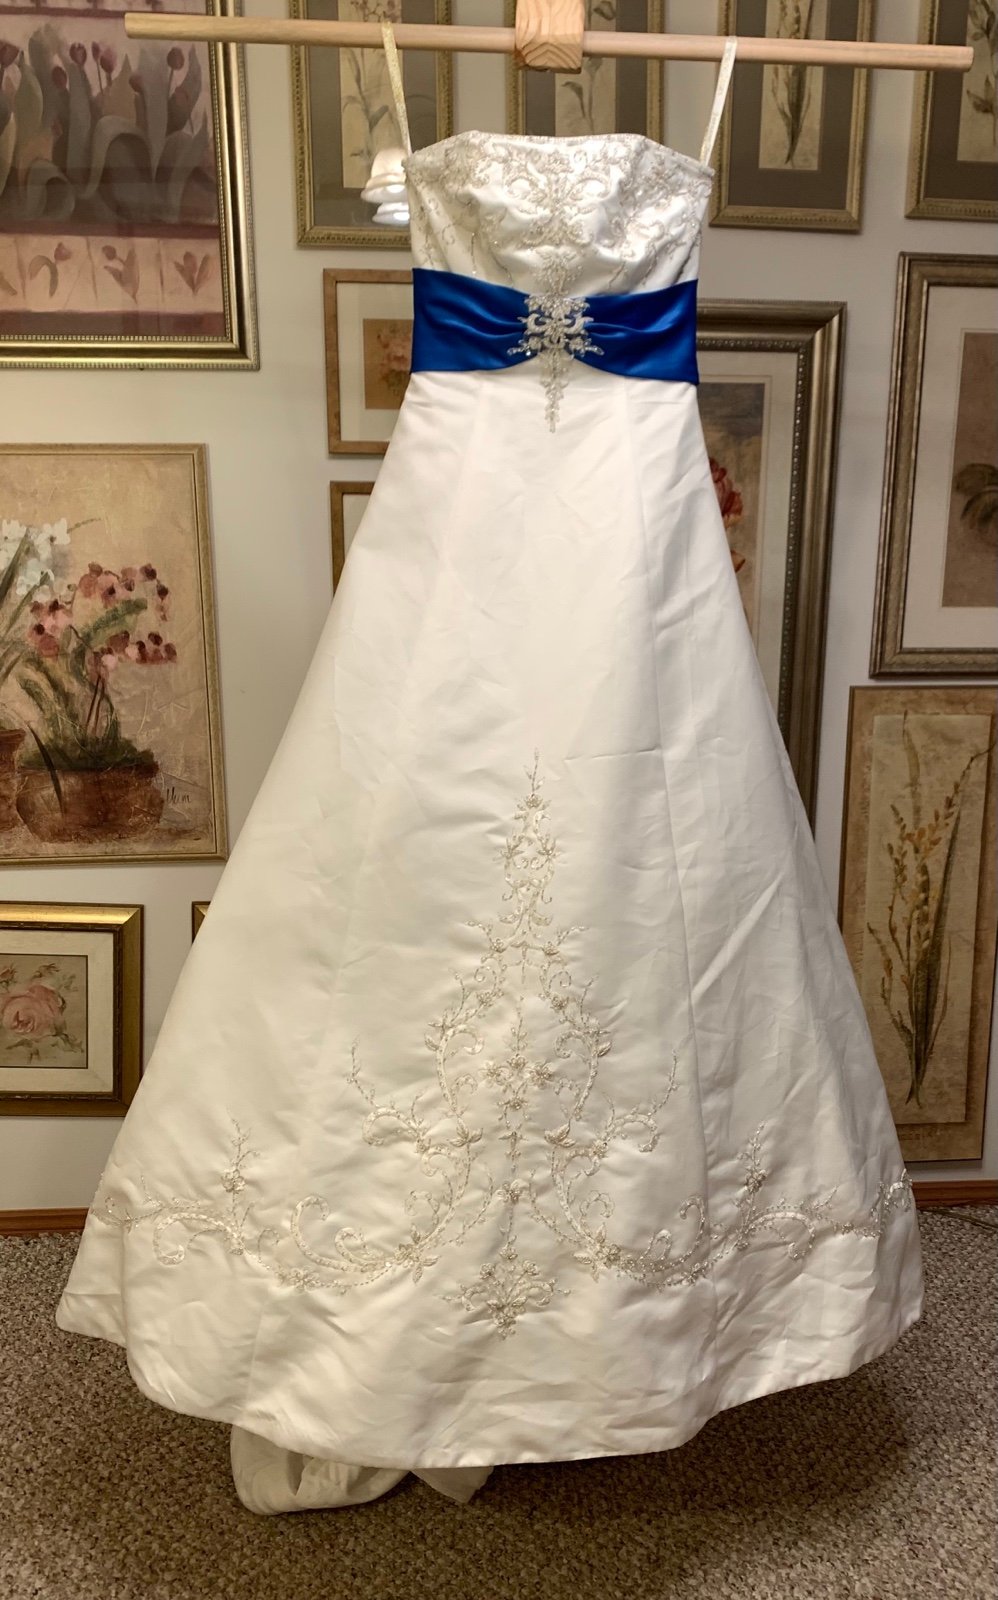 Comfortable NWT ivory royal blue accent strapless wedding dress moCEaXygq Store Online